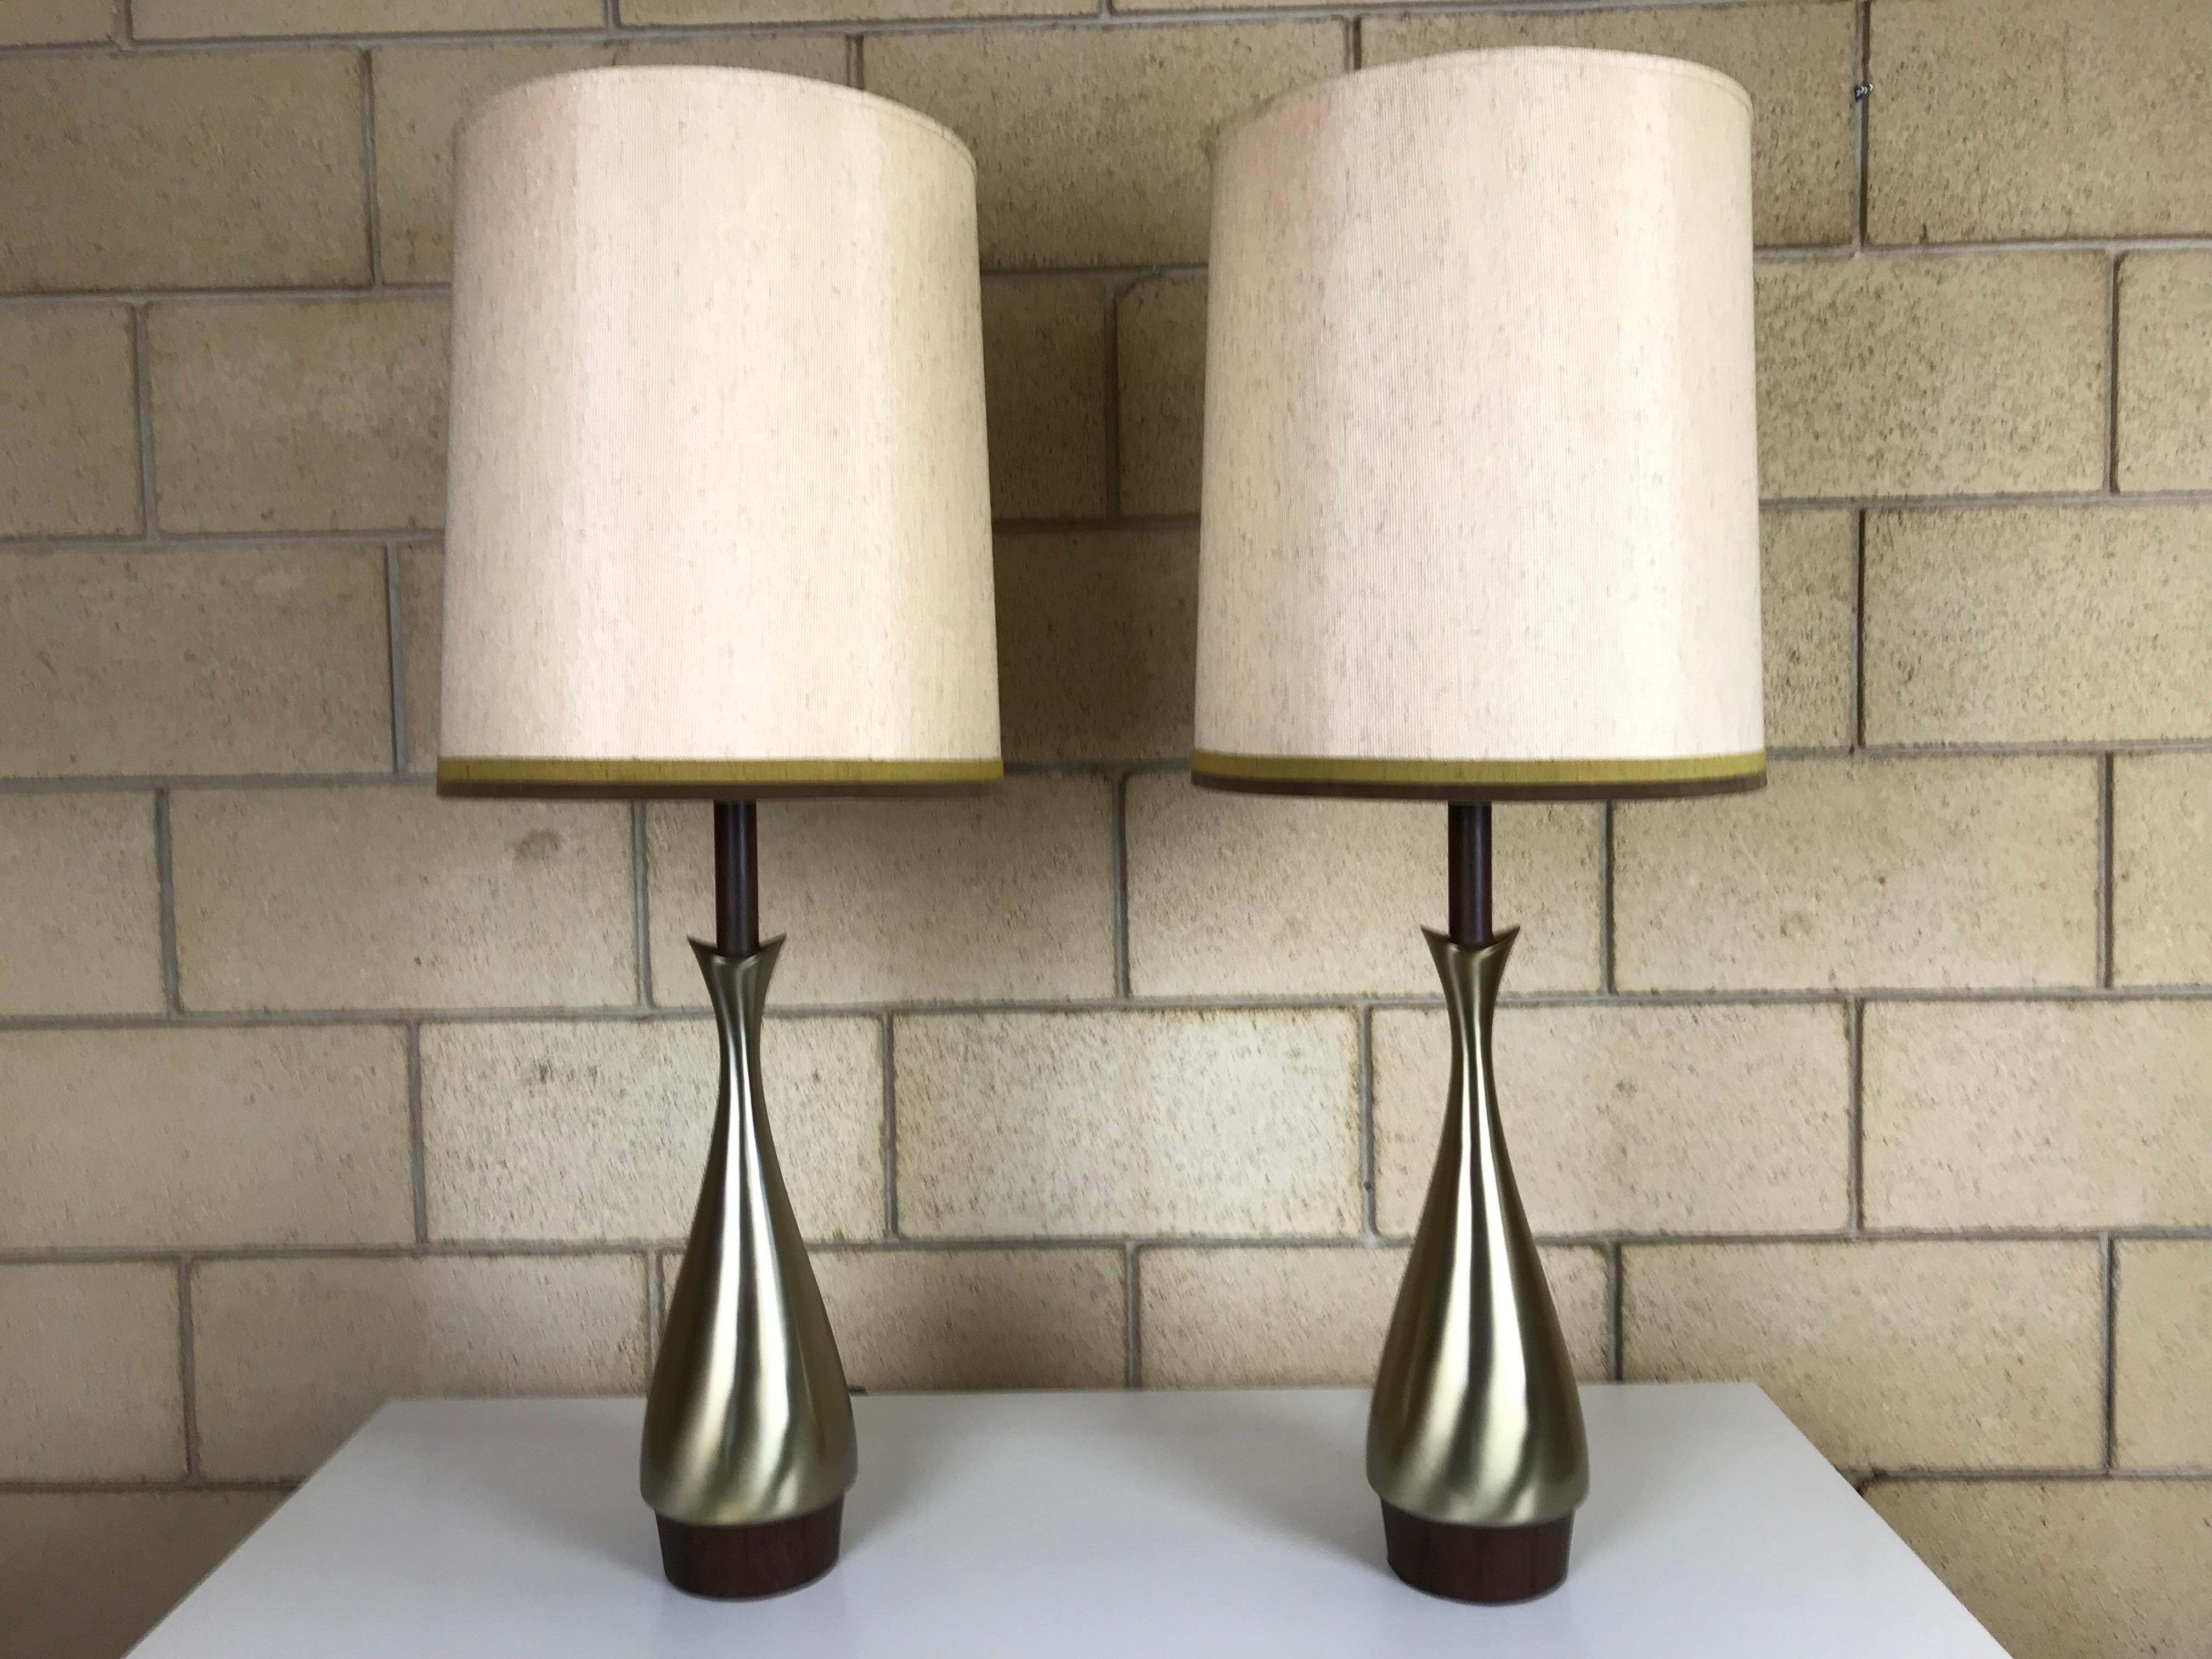 A pair of wonderfully designed brass and rosewood laminate three-stage table lamps by the Laurel Lamp Co. These lamps are in great condition and have their rare original shades that are signed.
Lamp base measures: 34